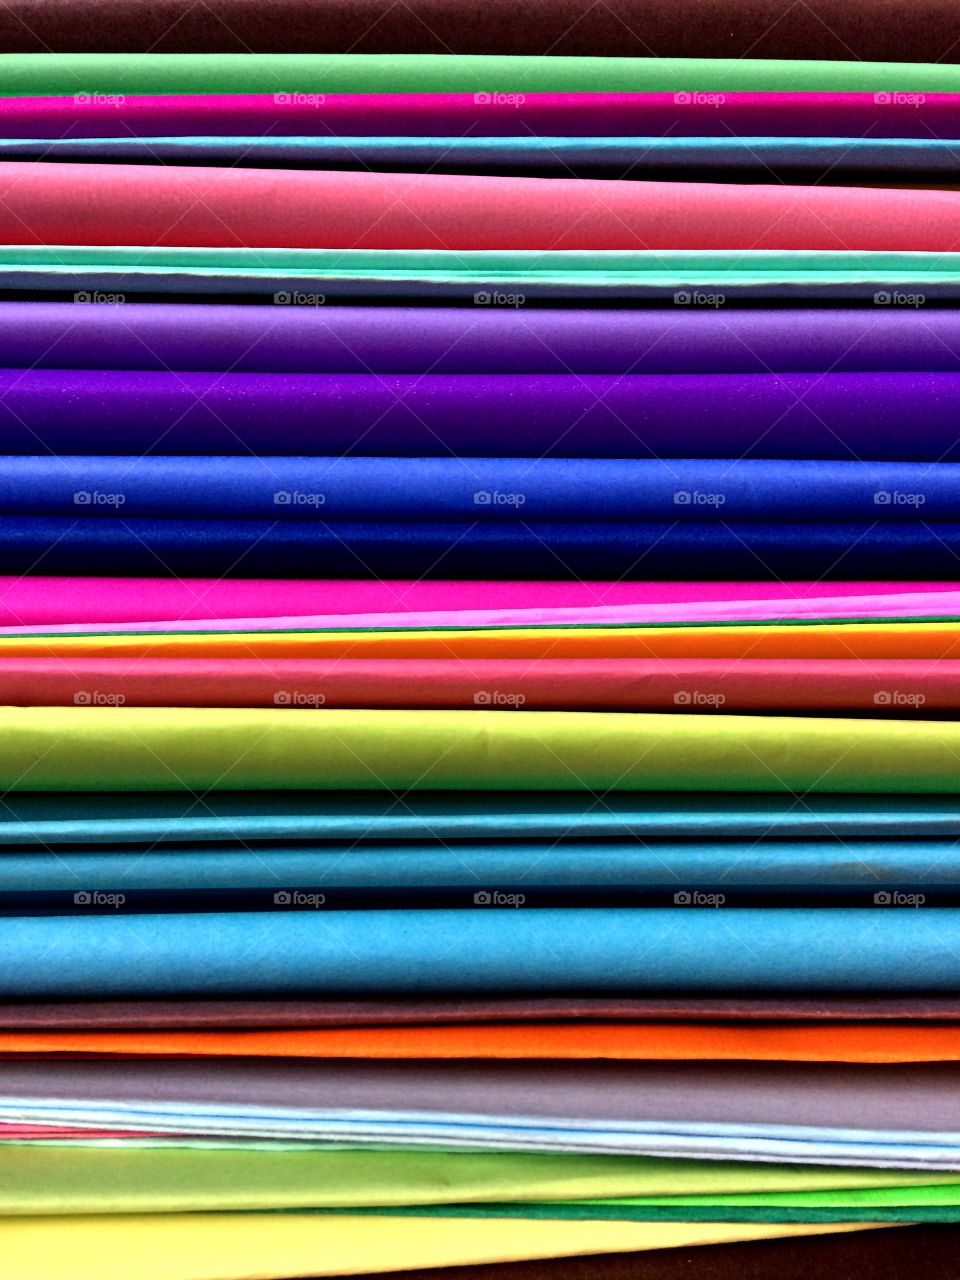 Colorful papers